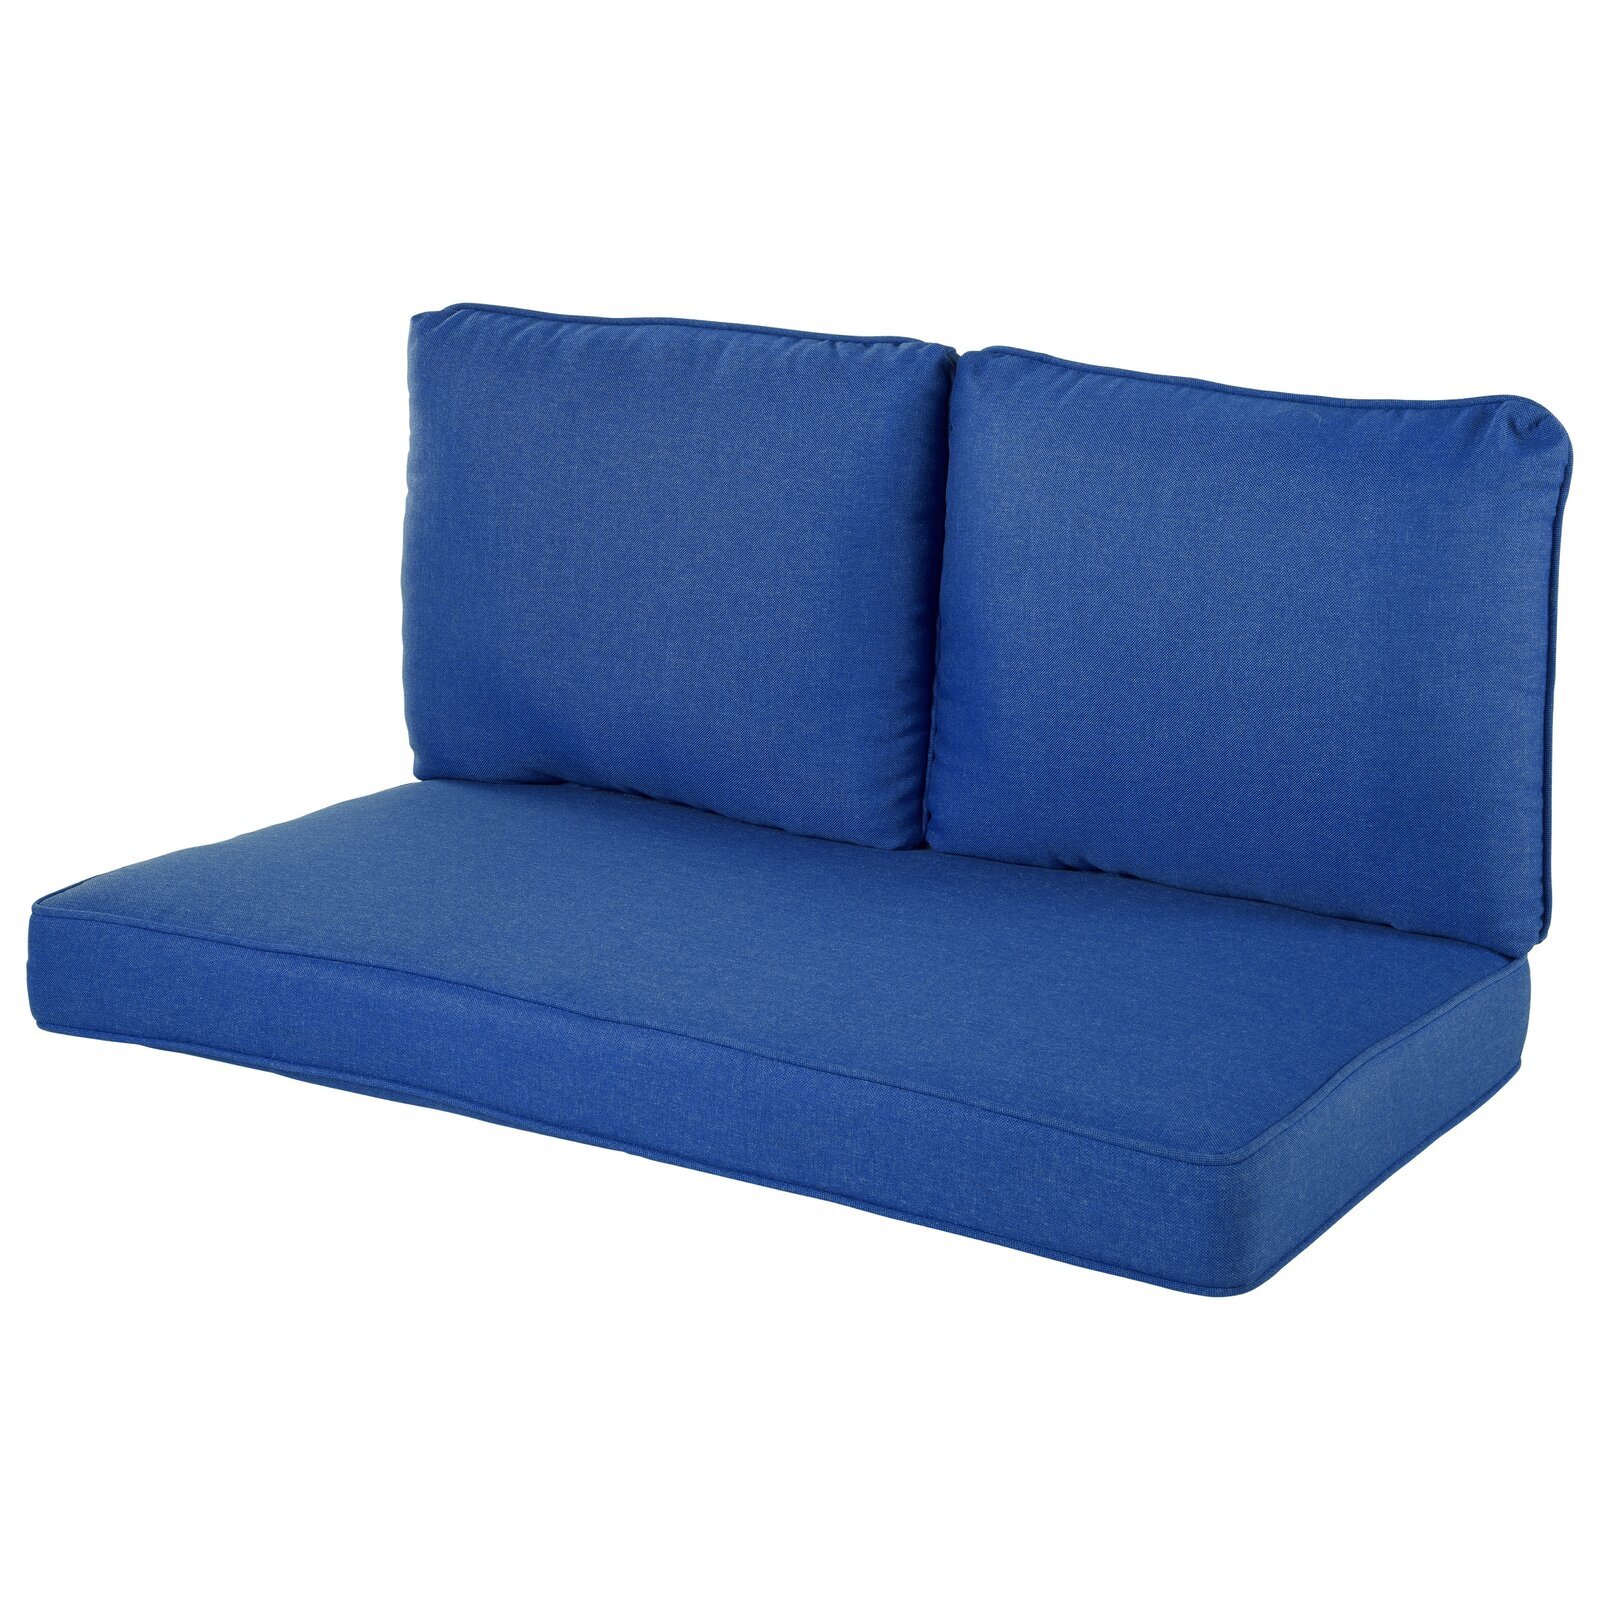 Three Piece High back Chair Cushions and Pillows Loveseat